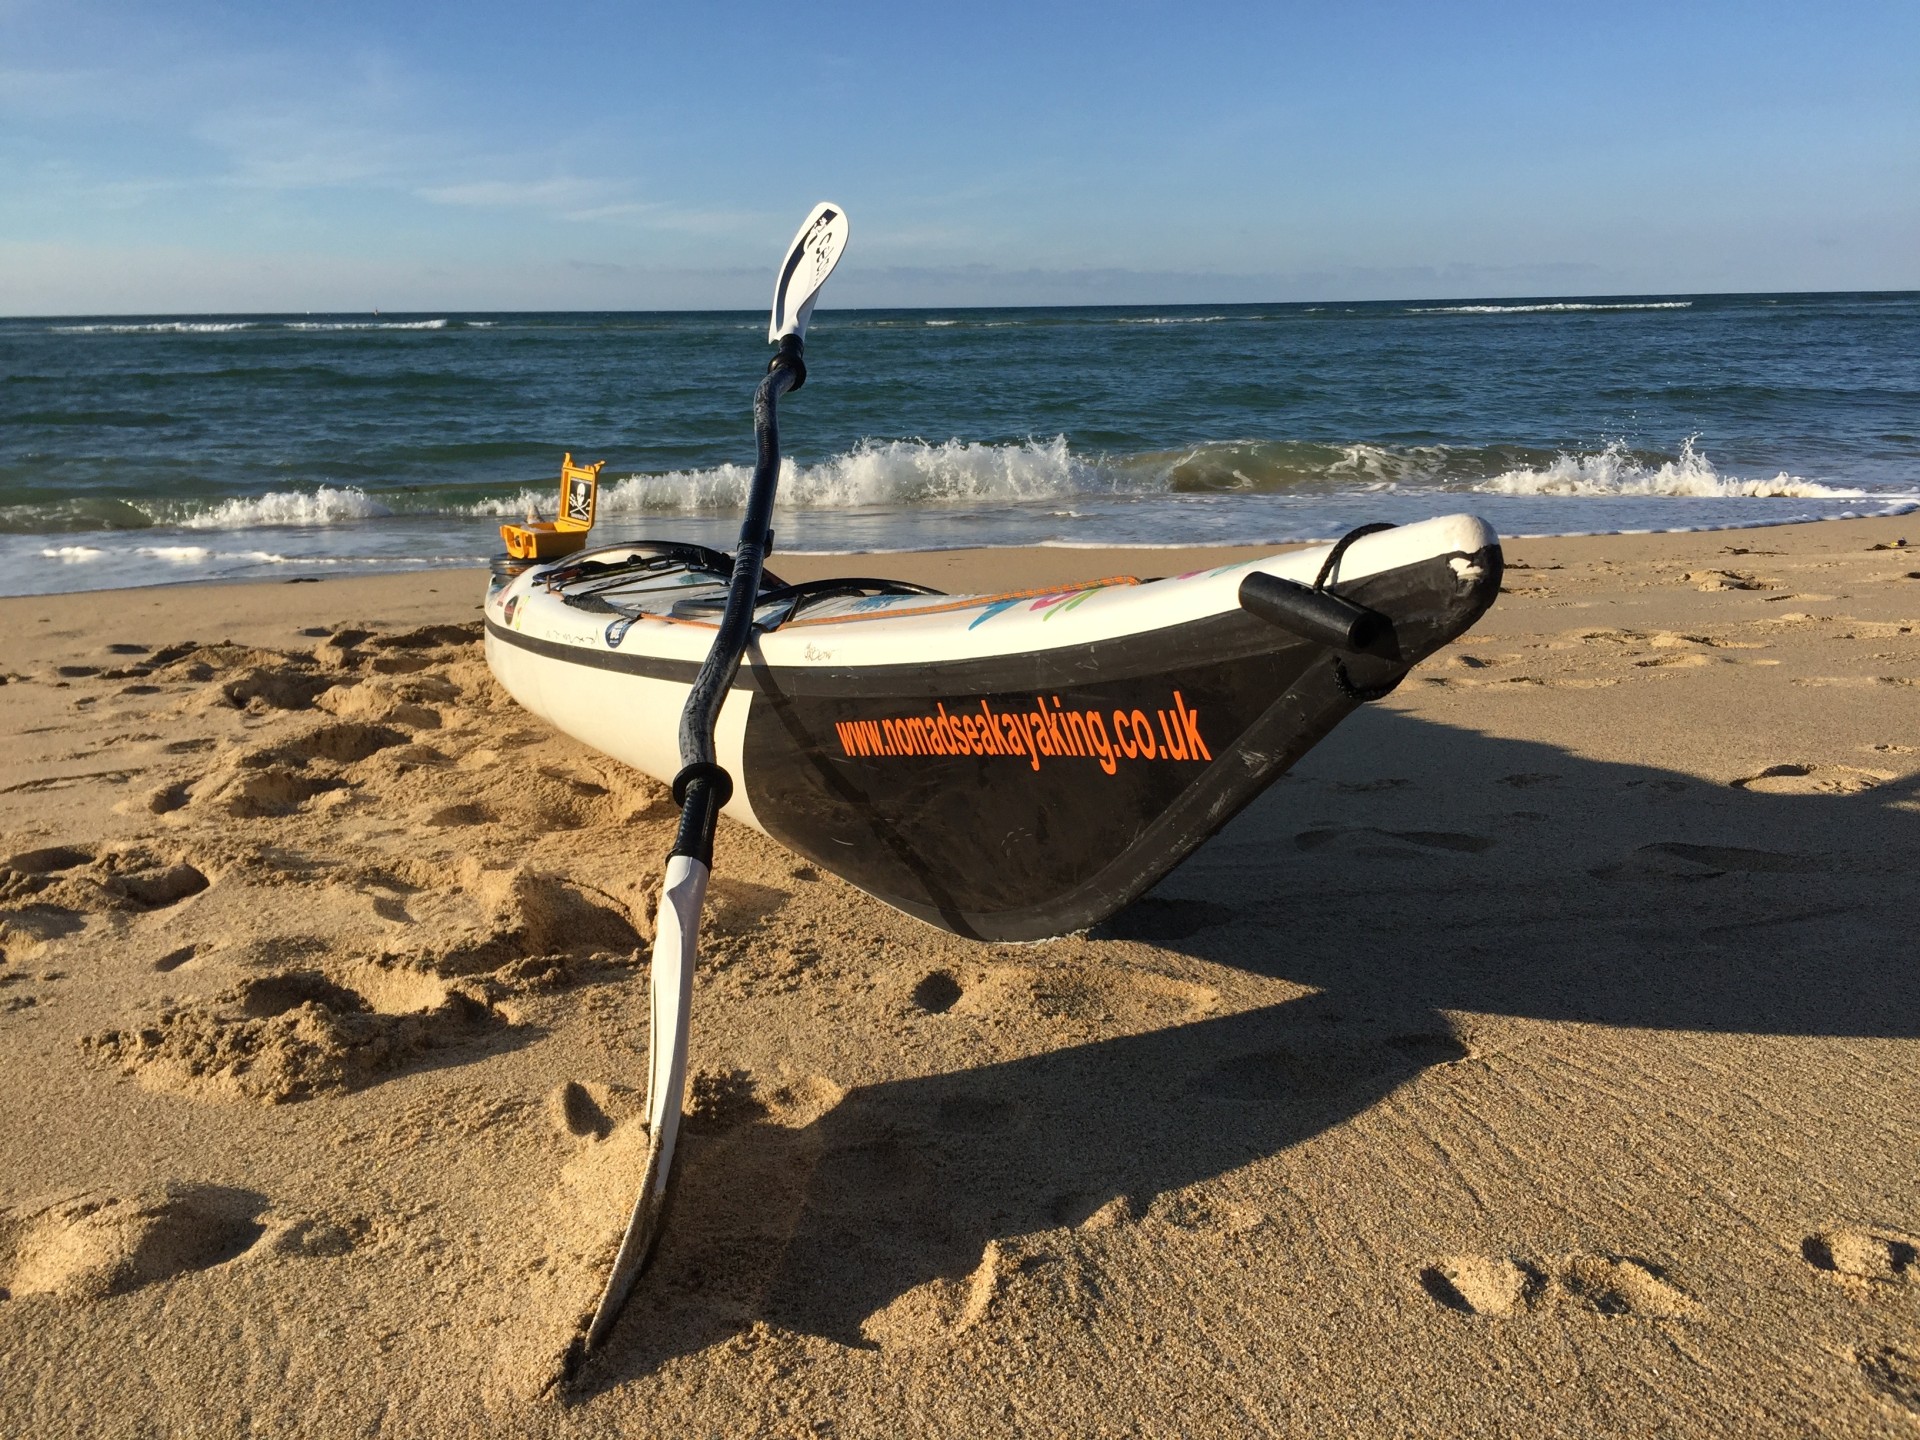 Sea kayak and paddle on a sandy beach with NOMAD Sea Kayaking.